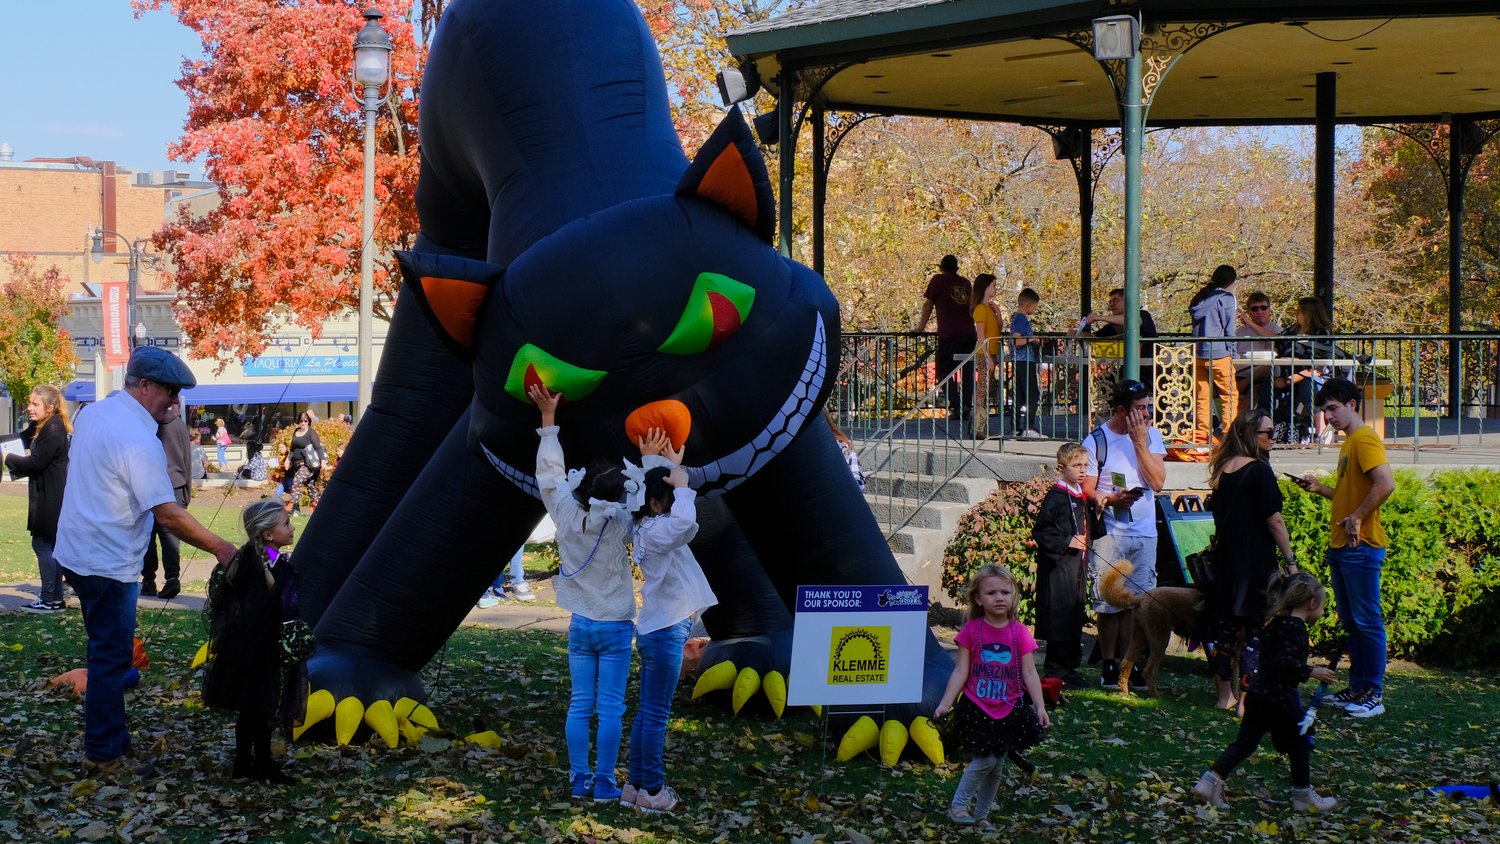 Kids playing with giant inflatable black cat.